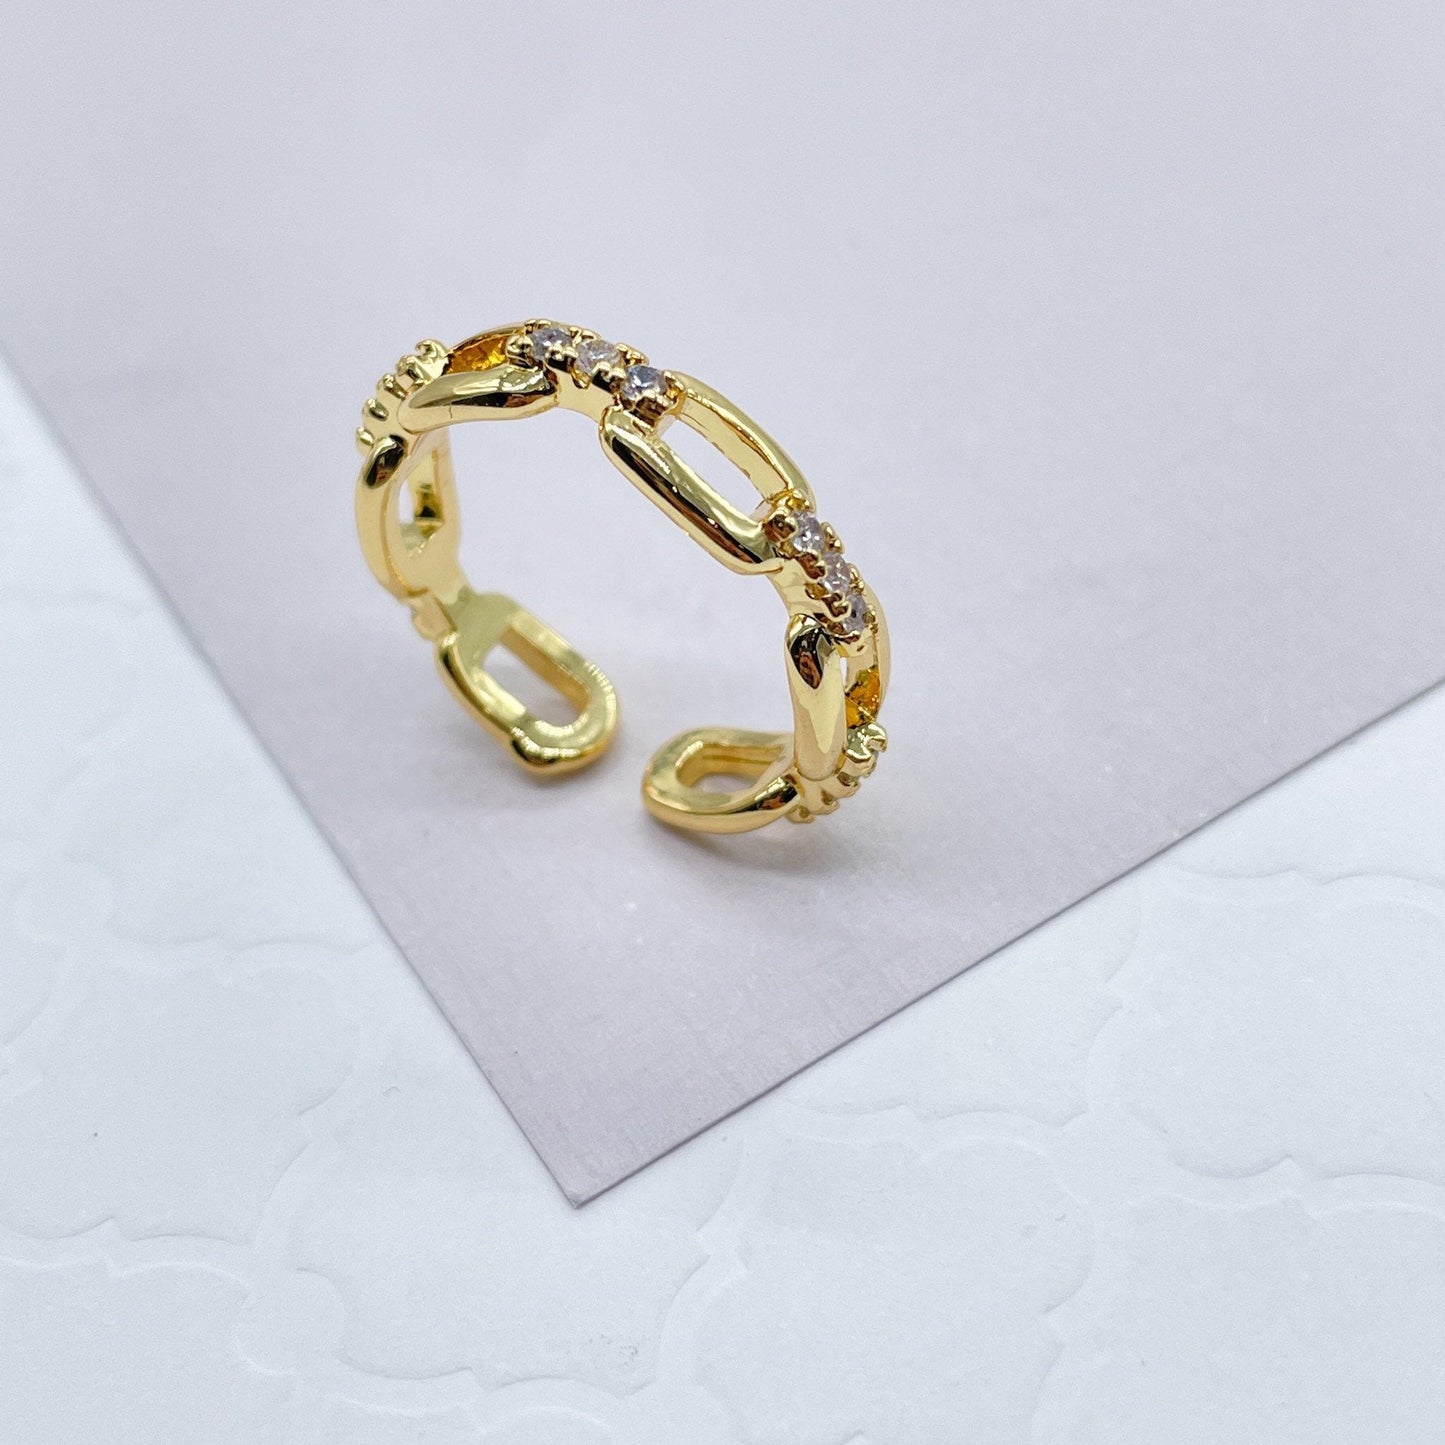 18k Gold Layered Minimalistic Adjustable Link Chain Ring Featuring Micro Pave